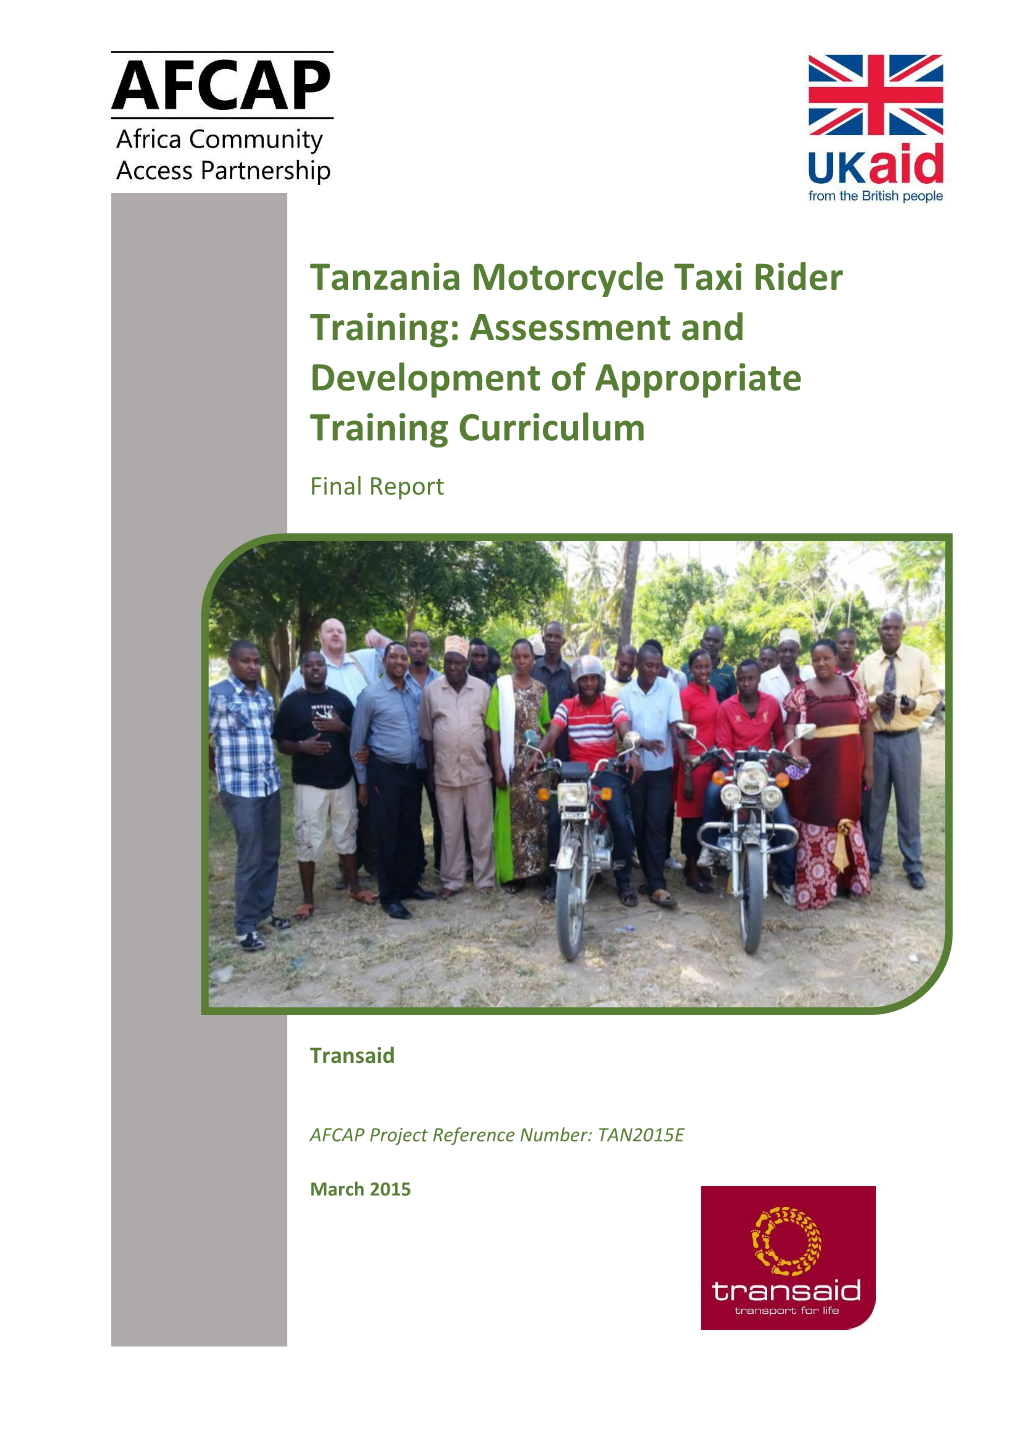 Tanzania Motorcycle Taxi Rider Training: Assessment and Development of Appropriate Training Curriculum Final Report